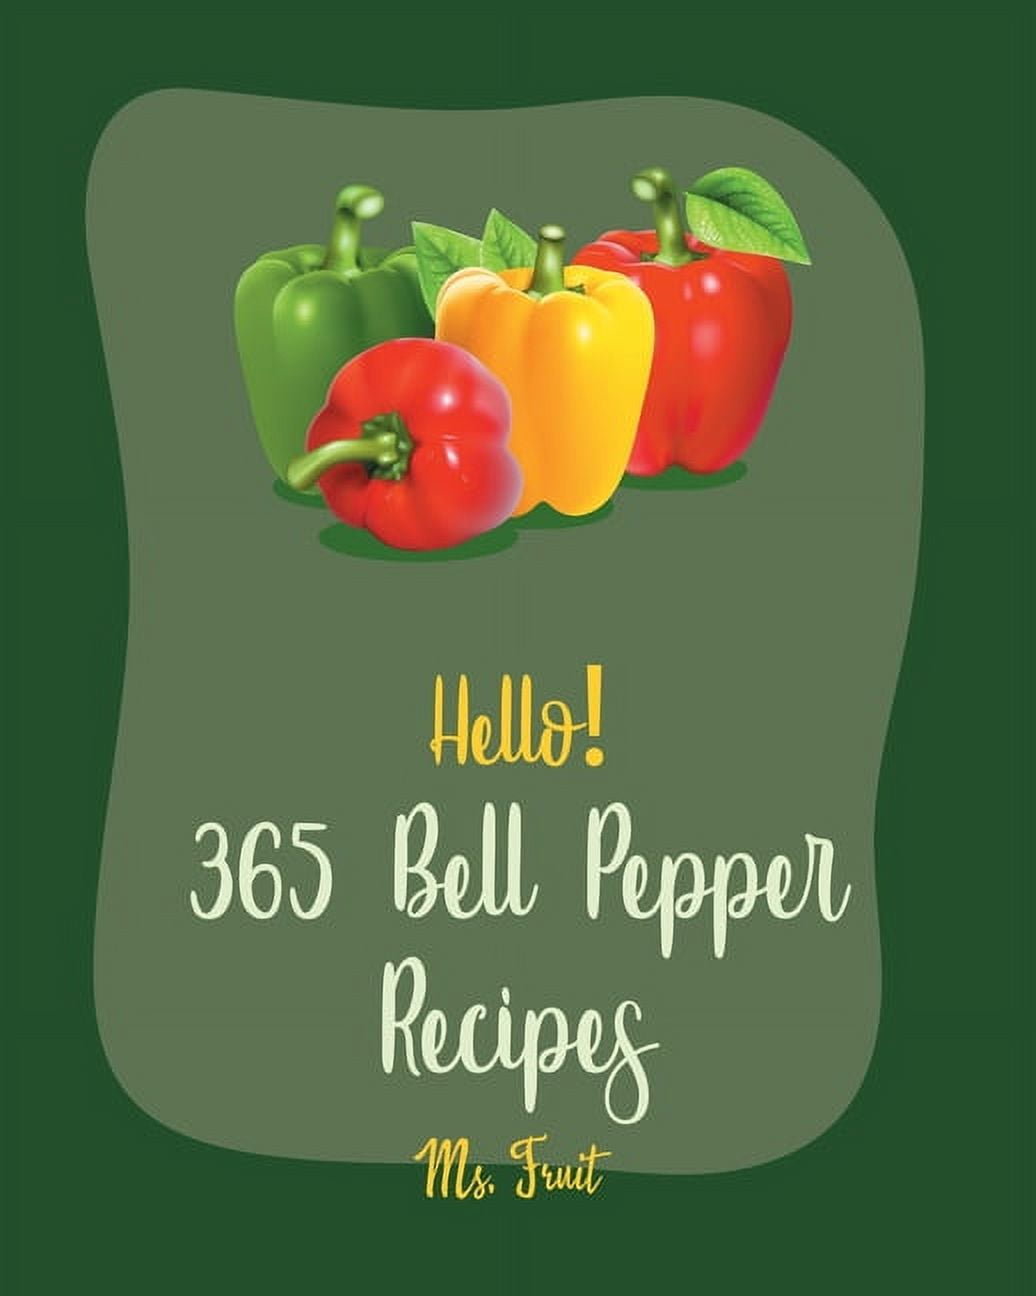 Red Bell Peppers at Whole Foods Market